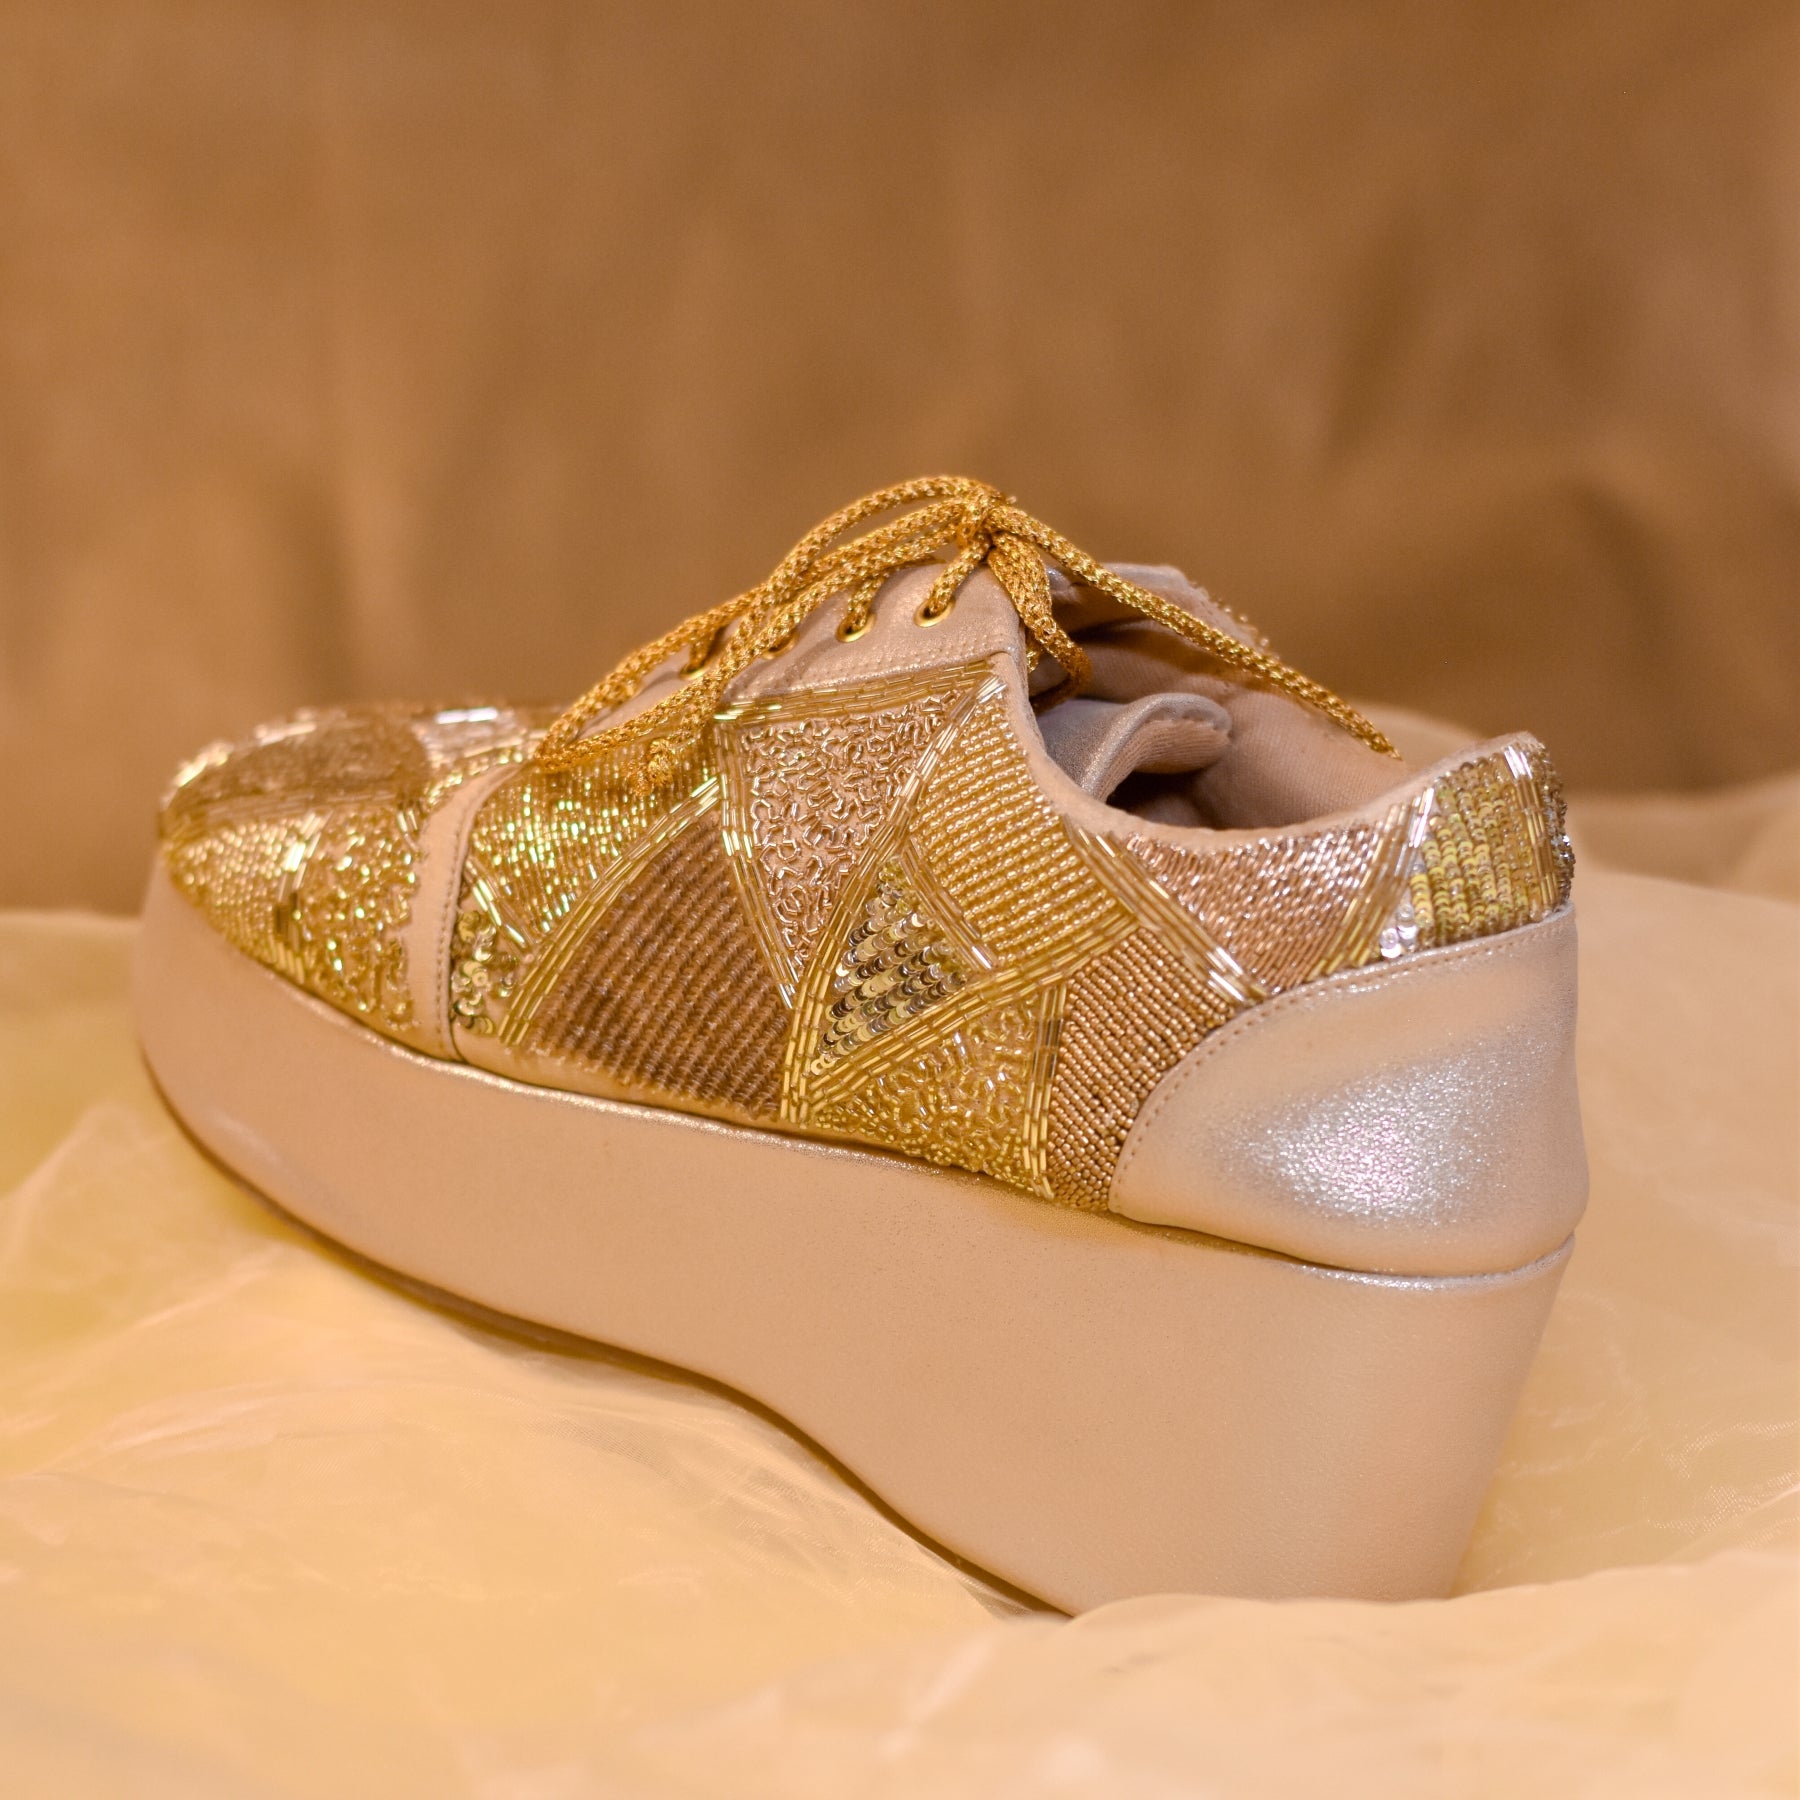 Shiny stylish golden sneaker wedges from India for the world